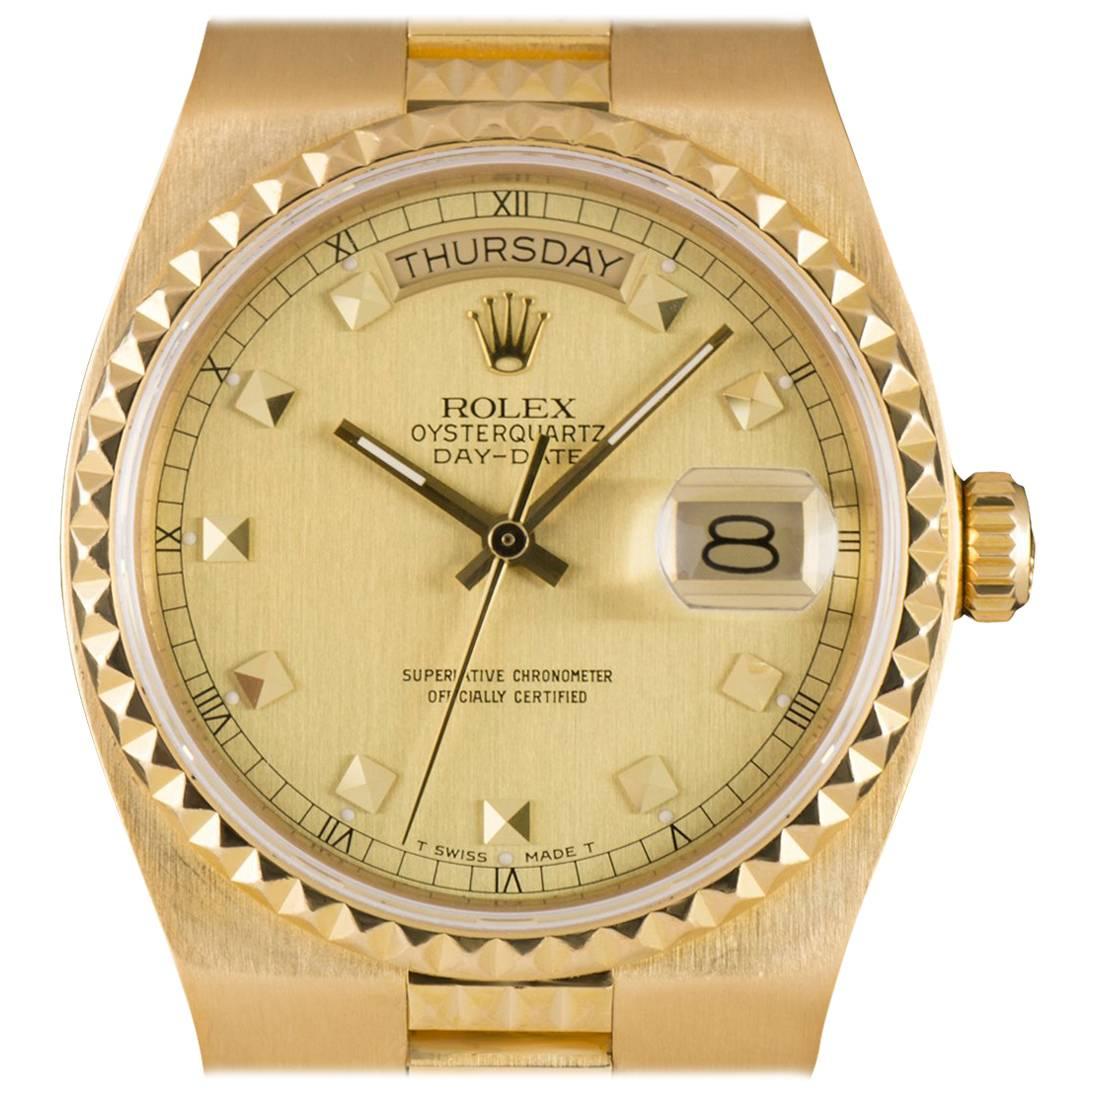 Rolex Day-Date Egyptian Oysterquartz Gents Gold Champagne Dial B&P 19028 Watch